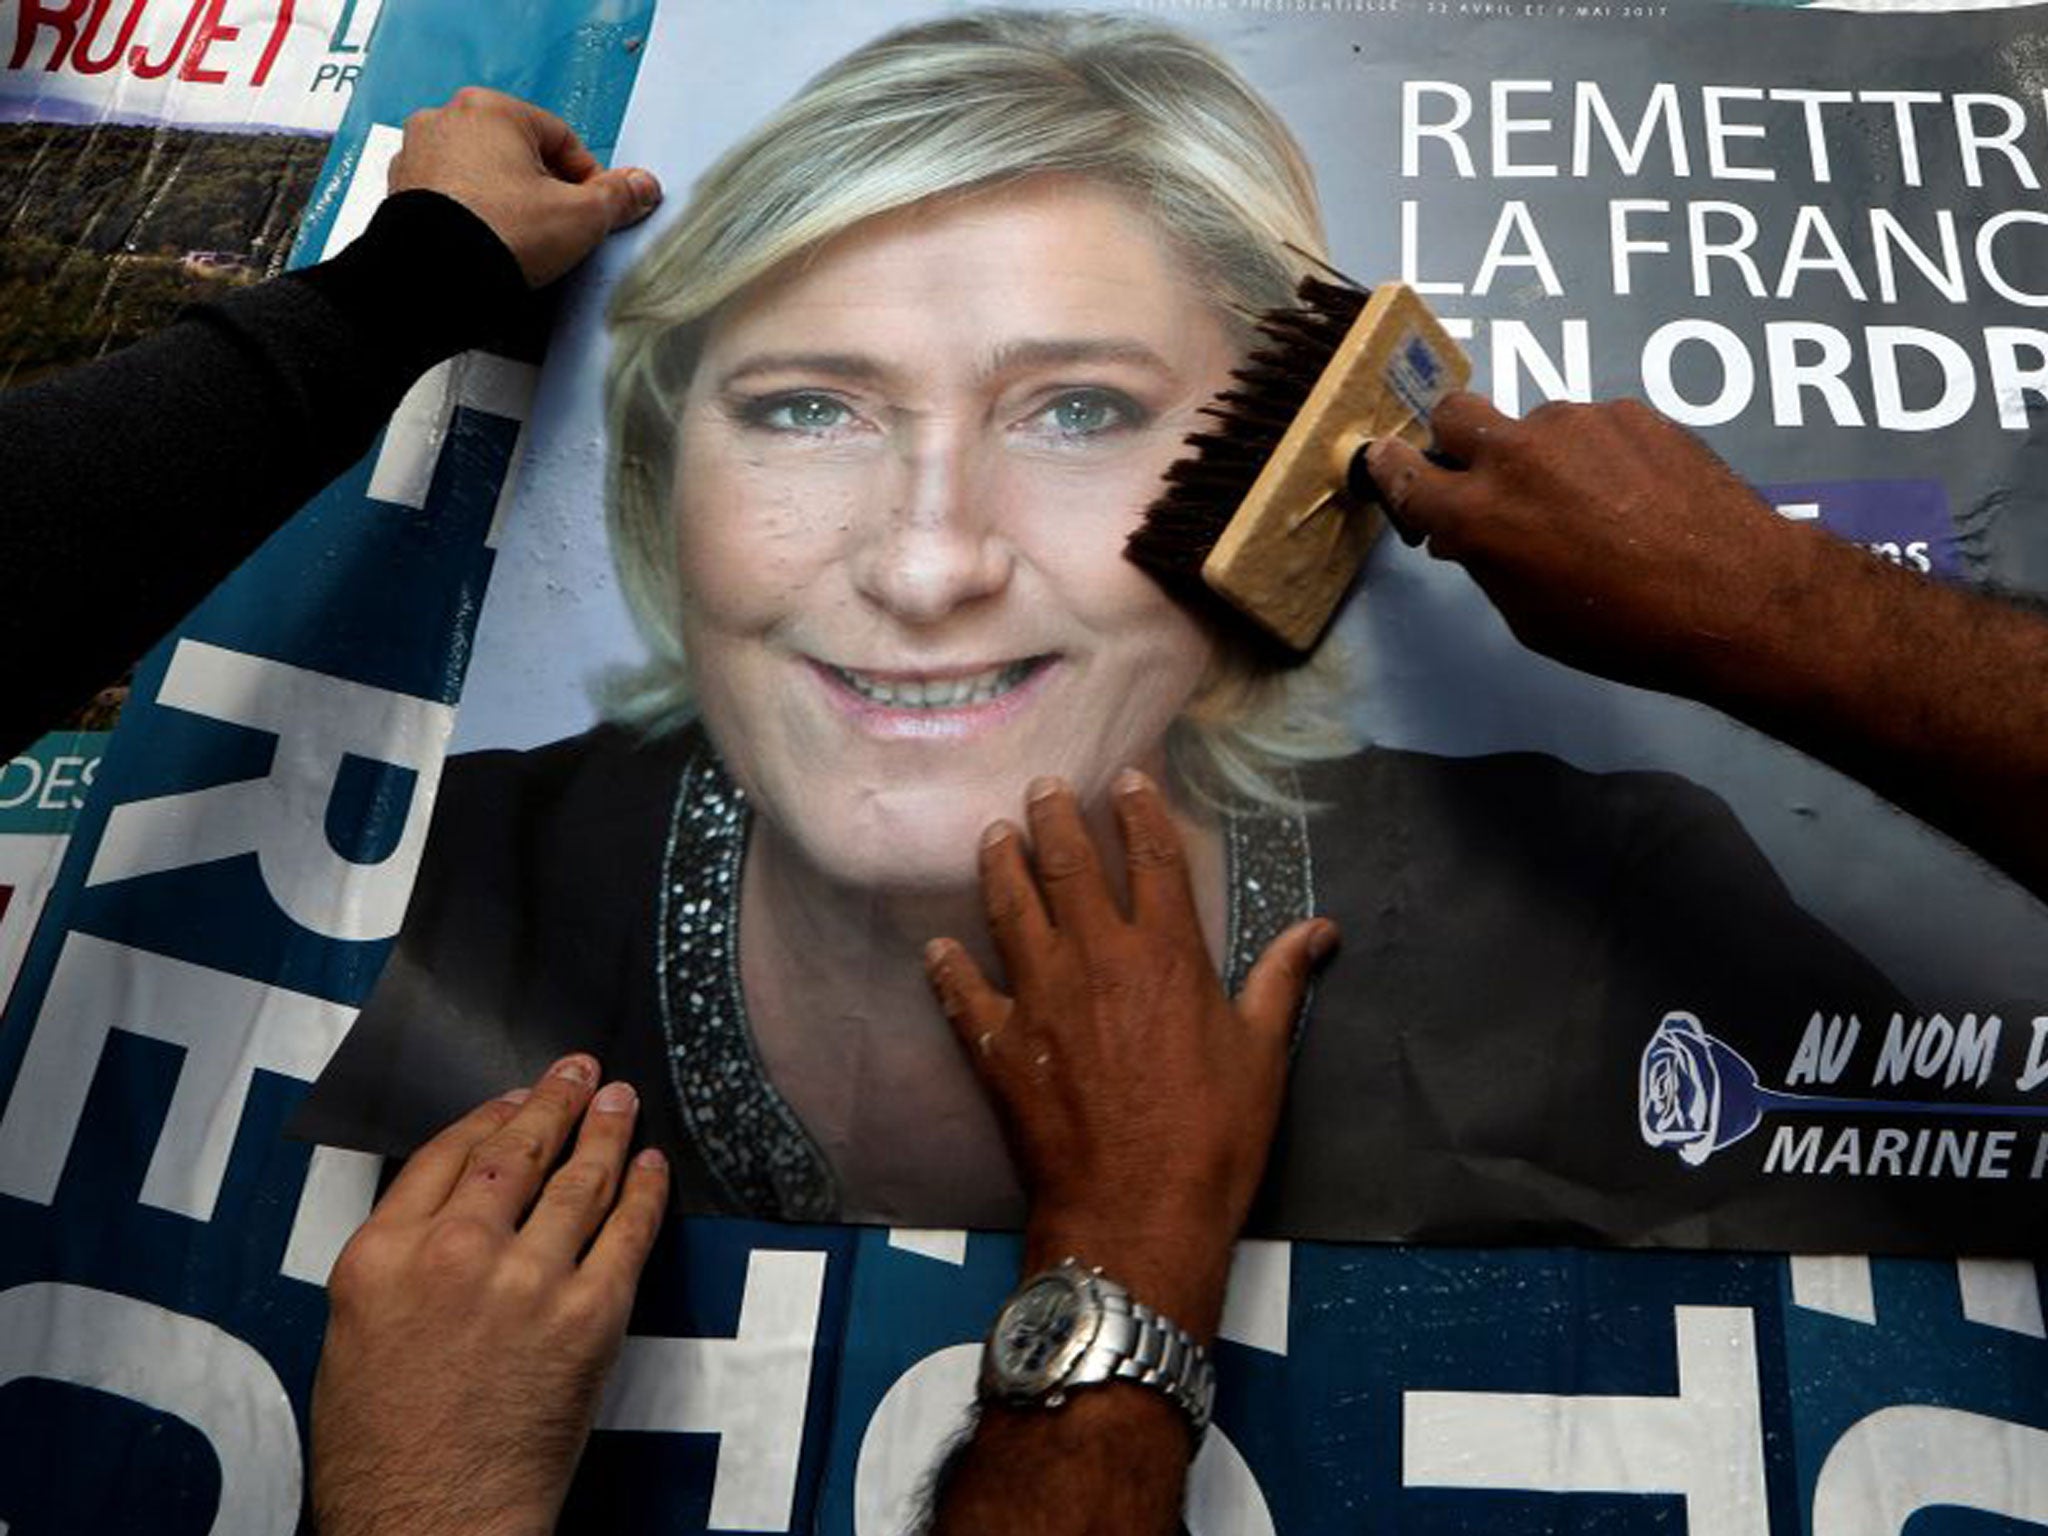 Le Pen’s plans to withdraw from the euro and erect trade barriers are of particular concern